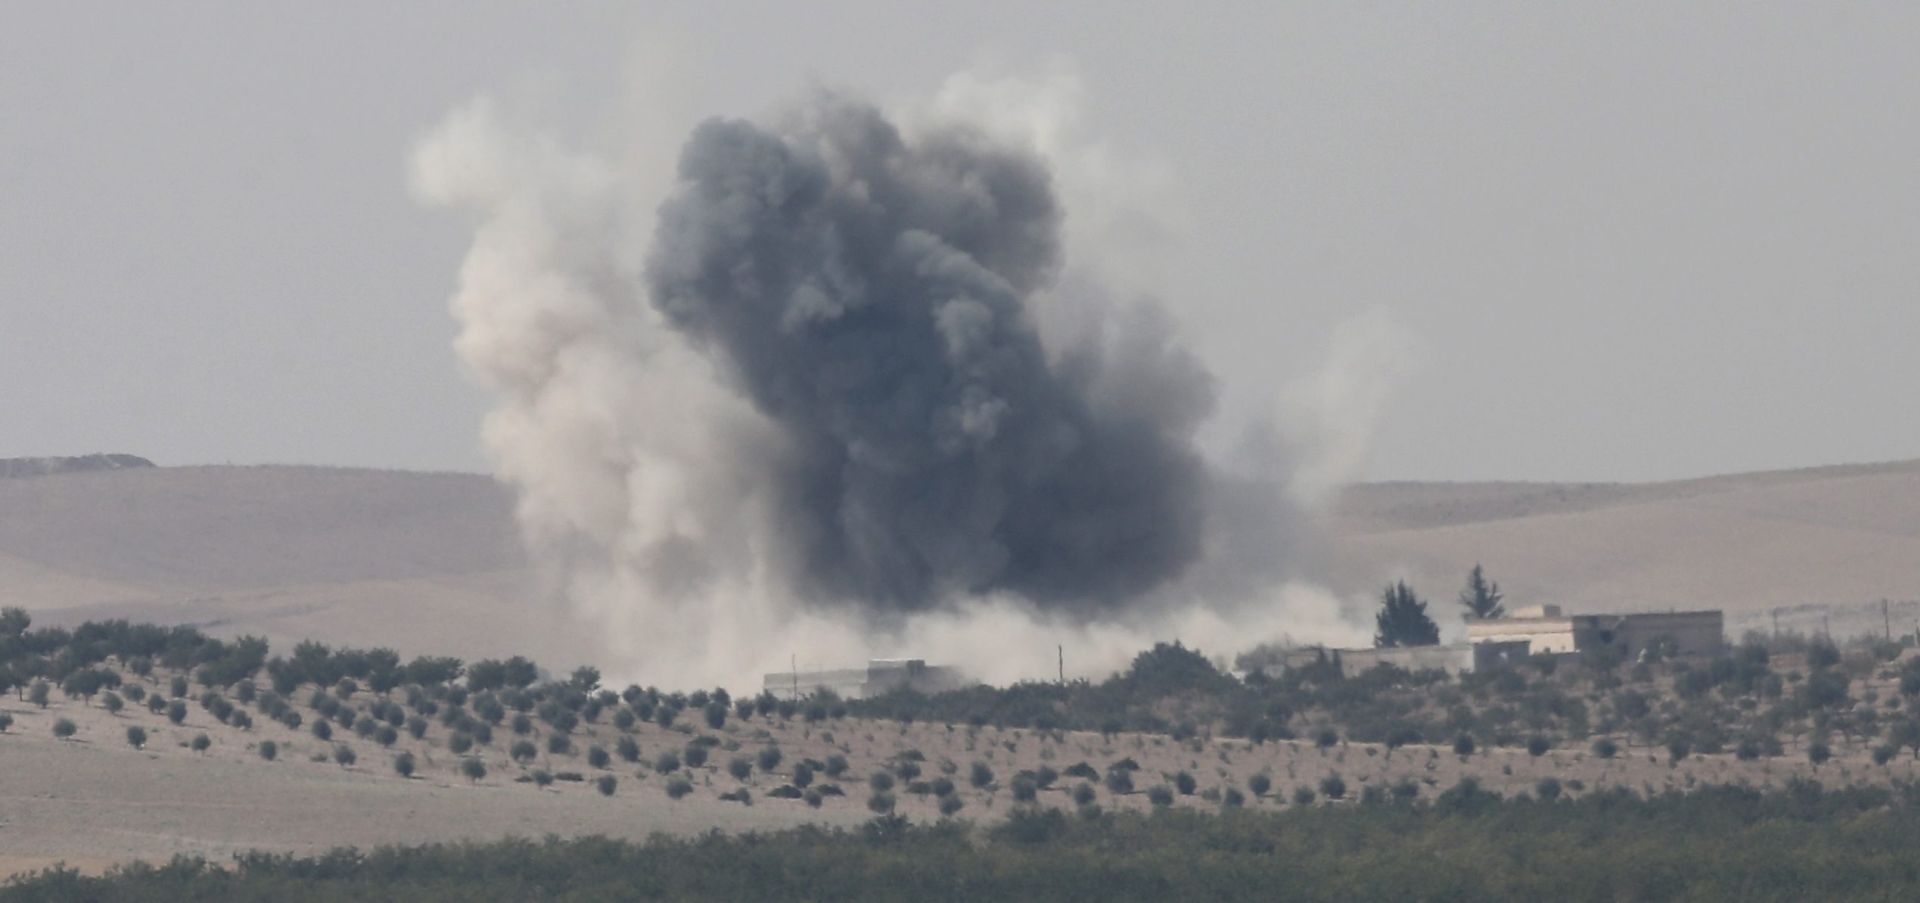 epa05508205 A picture taken from the Turkish side of the border shows smoke rising after attacks by war planes during an operation against the so-called Islamic State (ISIS or IS) militant group in Syria, as it is seen from Karkamis district of Gaziantep, Turkey, 24 August 2016. The Turkish army launched an offensive operation against ISIS in Syria's Jarablus with its war jets and army troops in coordination with the US led coalition war planes.  EPA/SEDAT SUNA